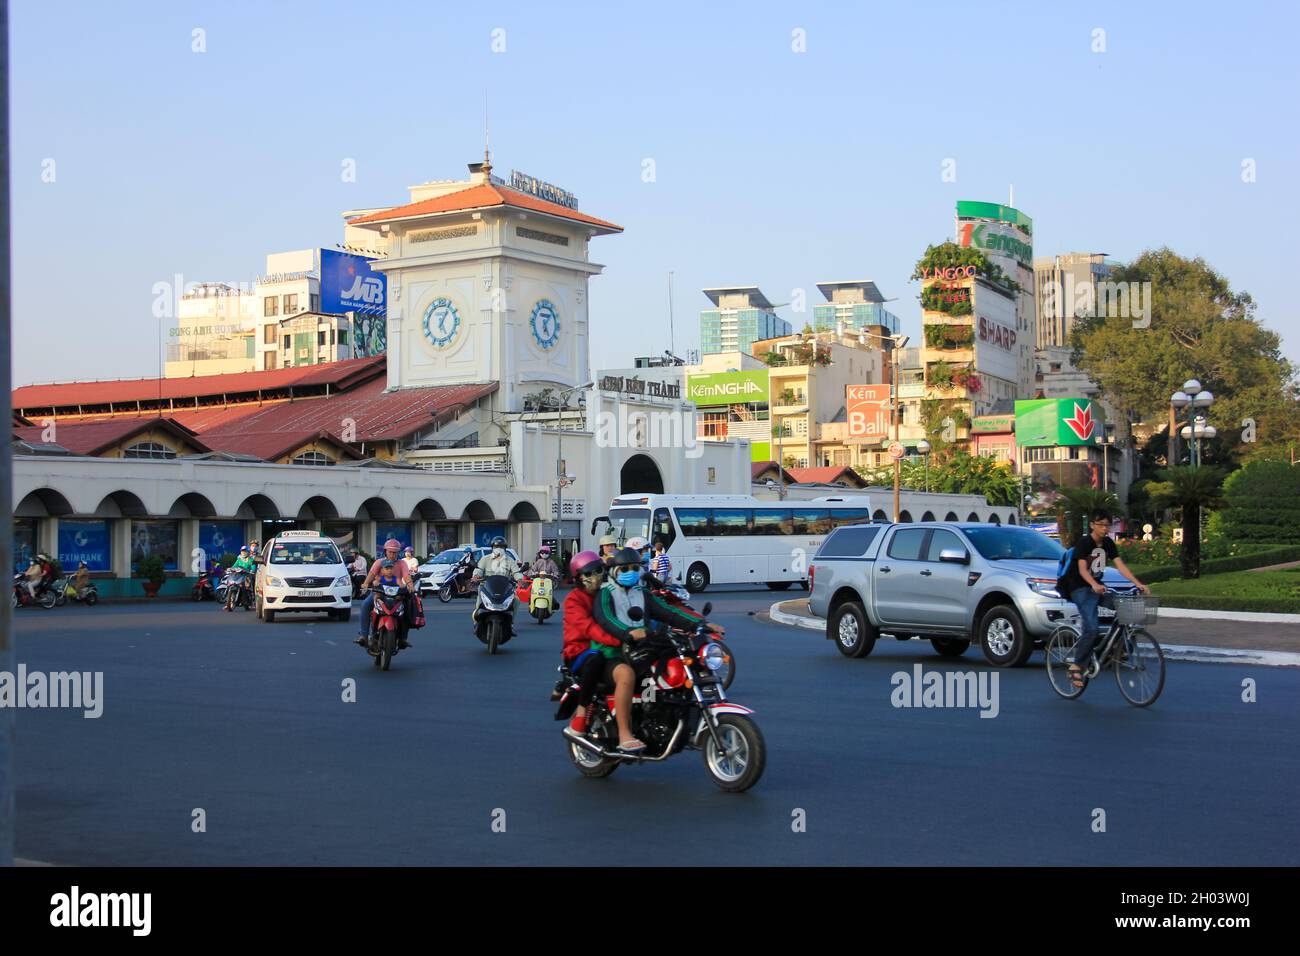 Ho Chi Minh City, Vietnam - Feb 20, 2016: Ben Thanh market is an old indoor marketplace in Ho Chi Minh City (Saigon) and a popular place for tourists Stock Photo